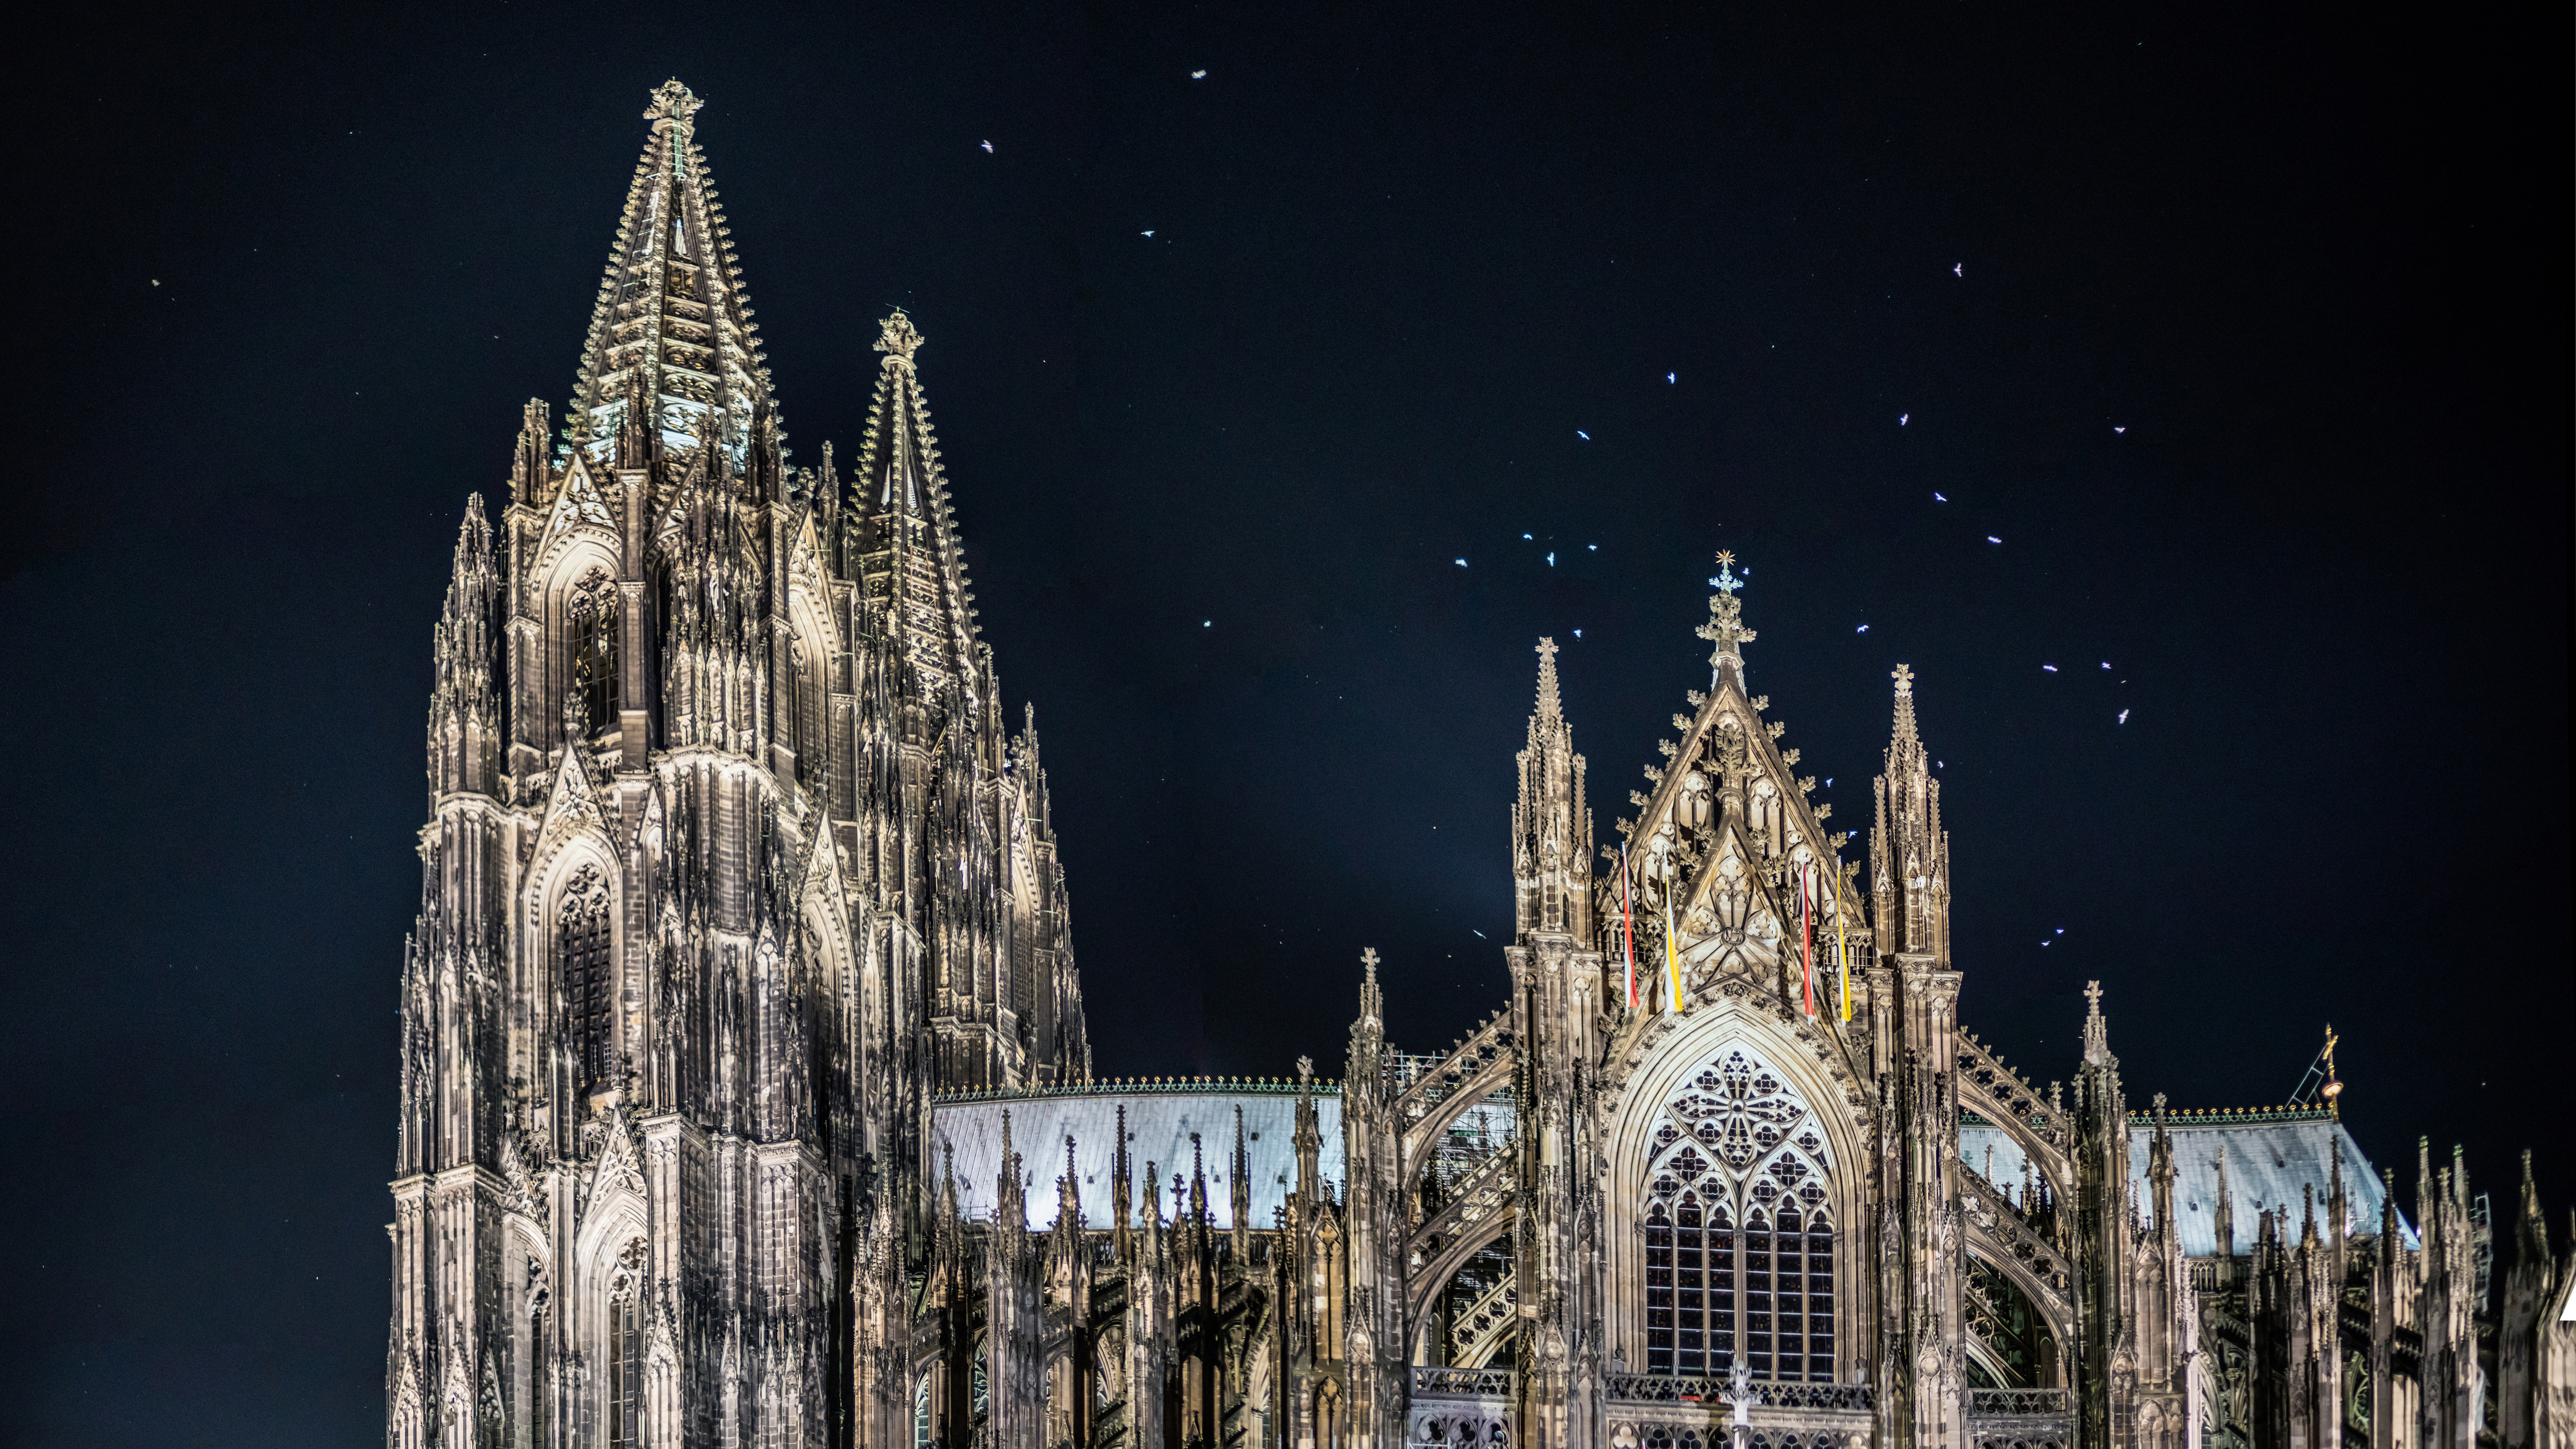 General 7680x4320 Trey Ratcliff photography Germany Cologne cathedral Cologne Cathedral building landmark Europe